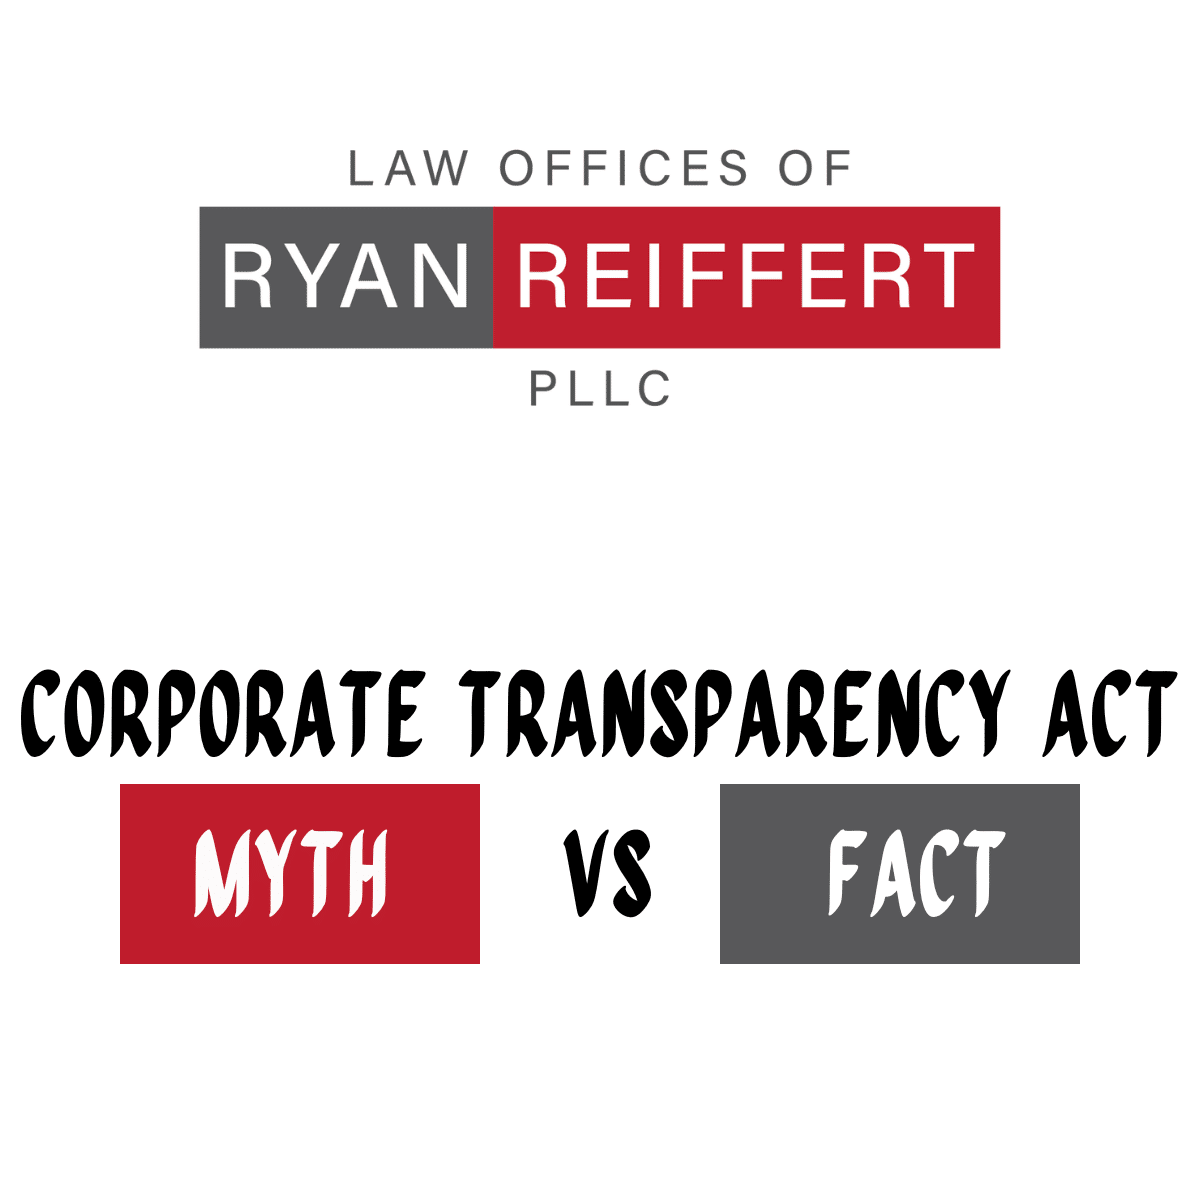 Corporate Transparency Act Myth Vs. Fact